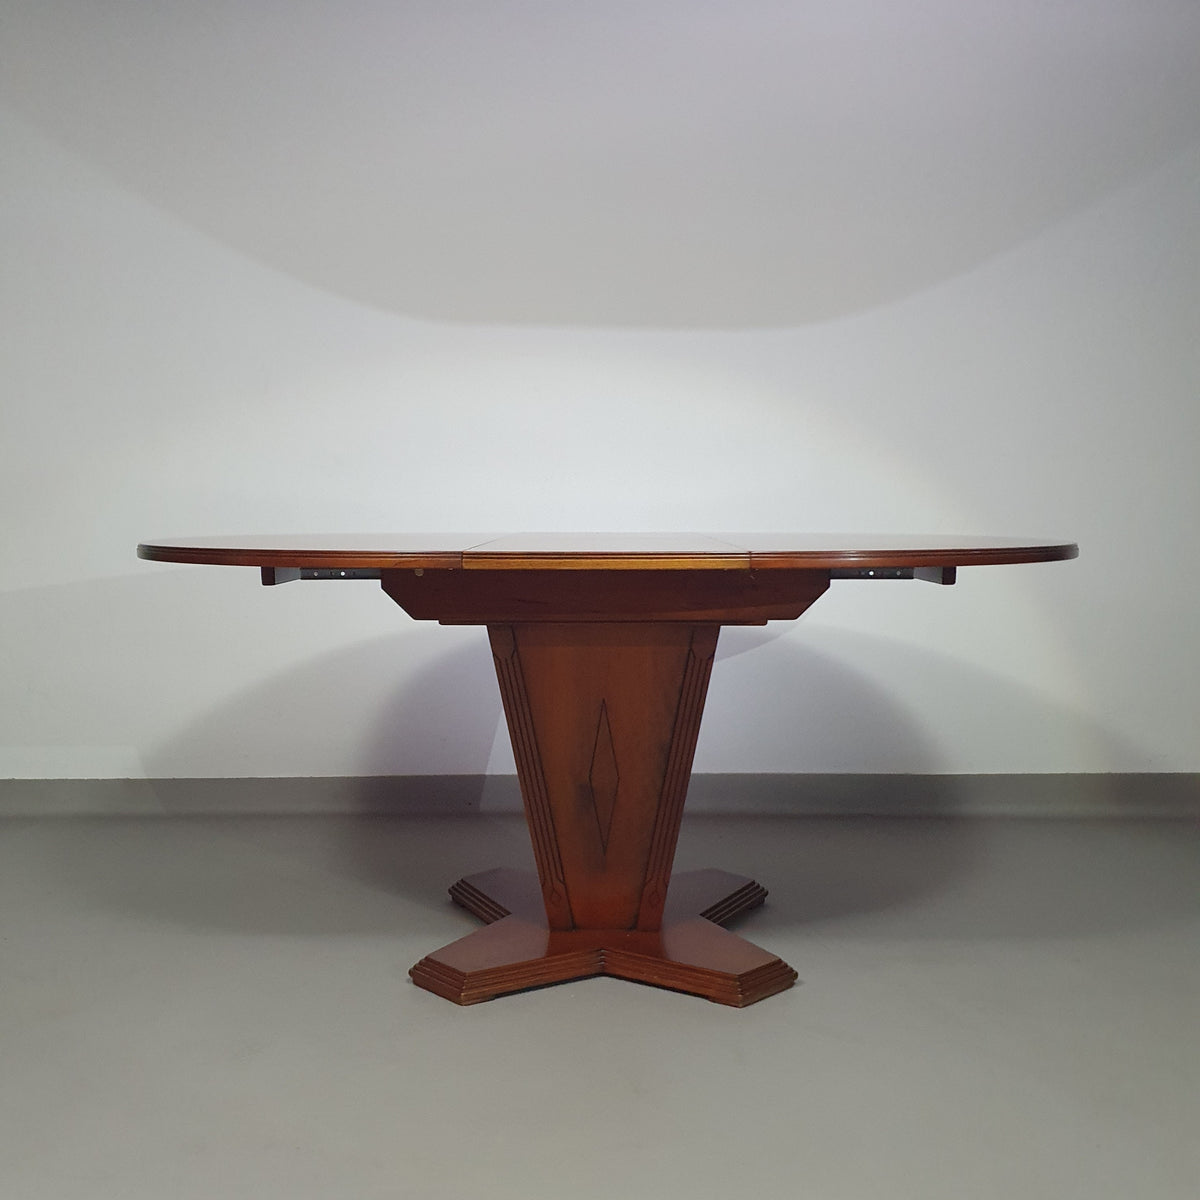 Extendable Art Deco dining table
1970s